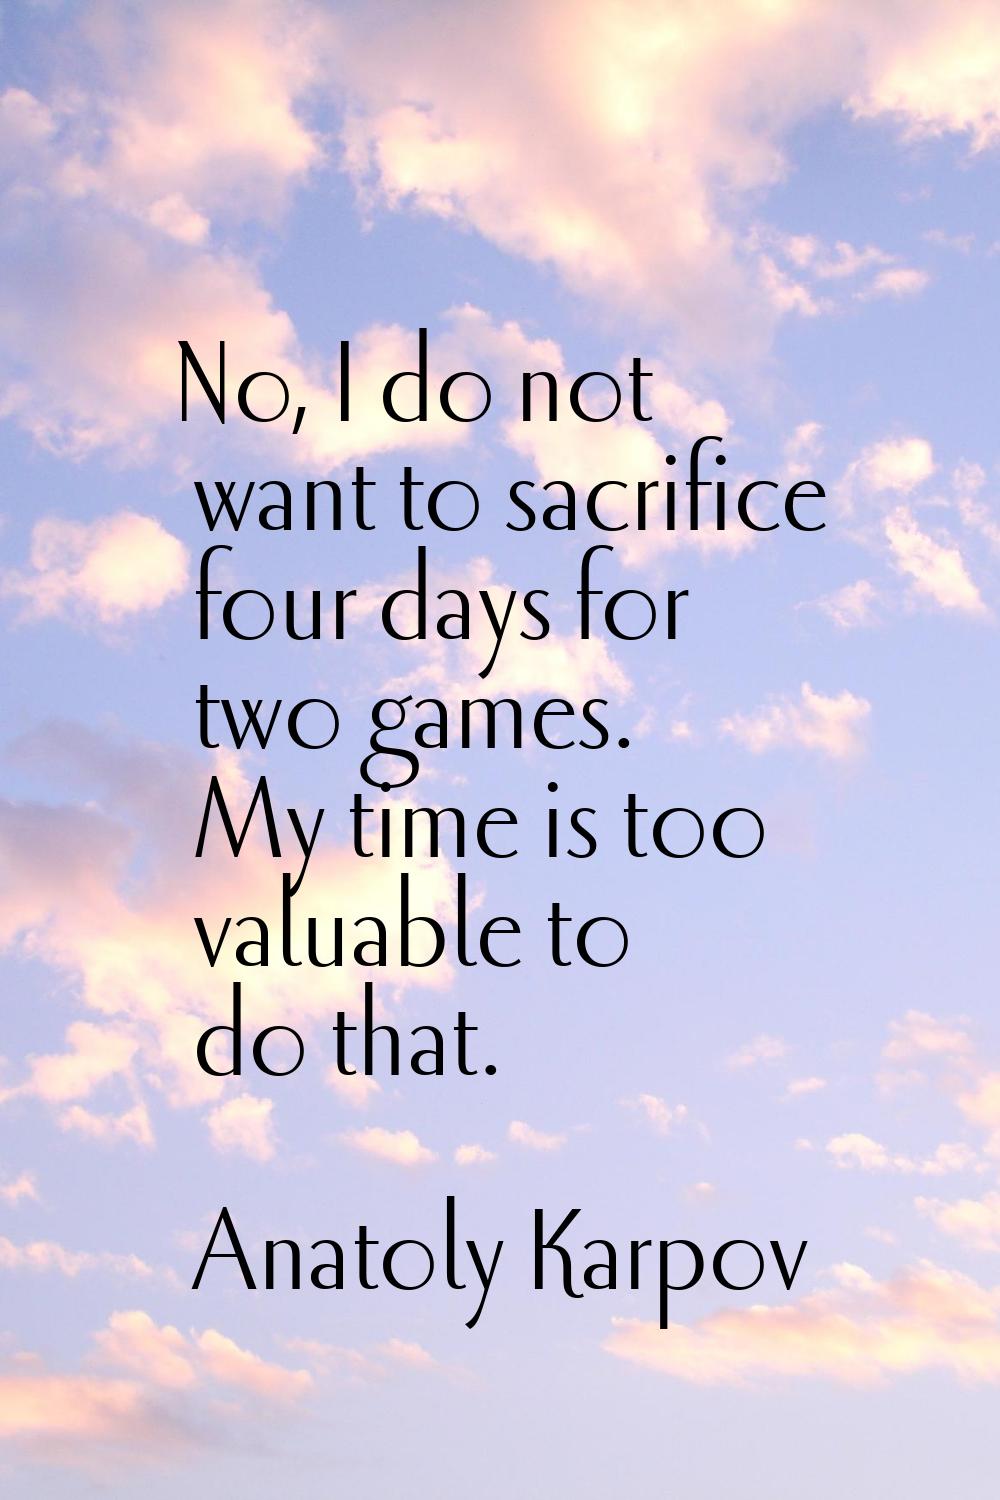 No, I do not want to sacrifice four days for two games. My time is too valuable to do that.